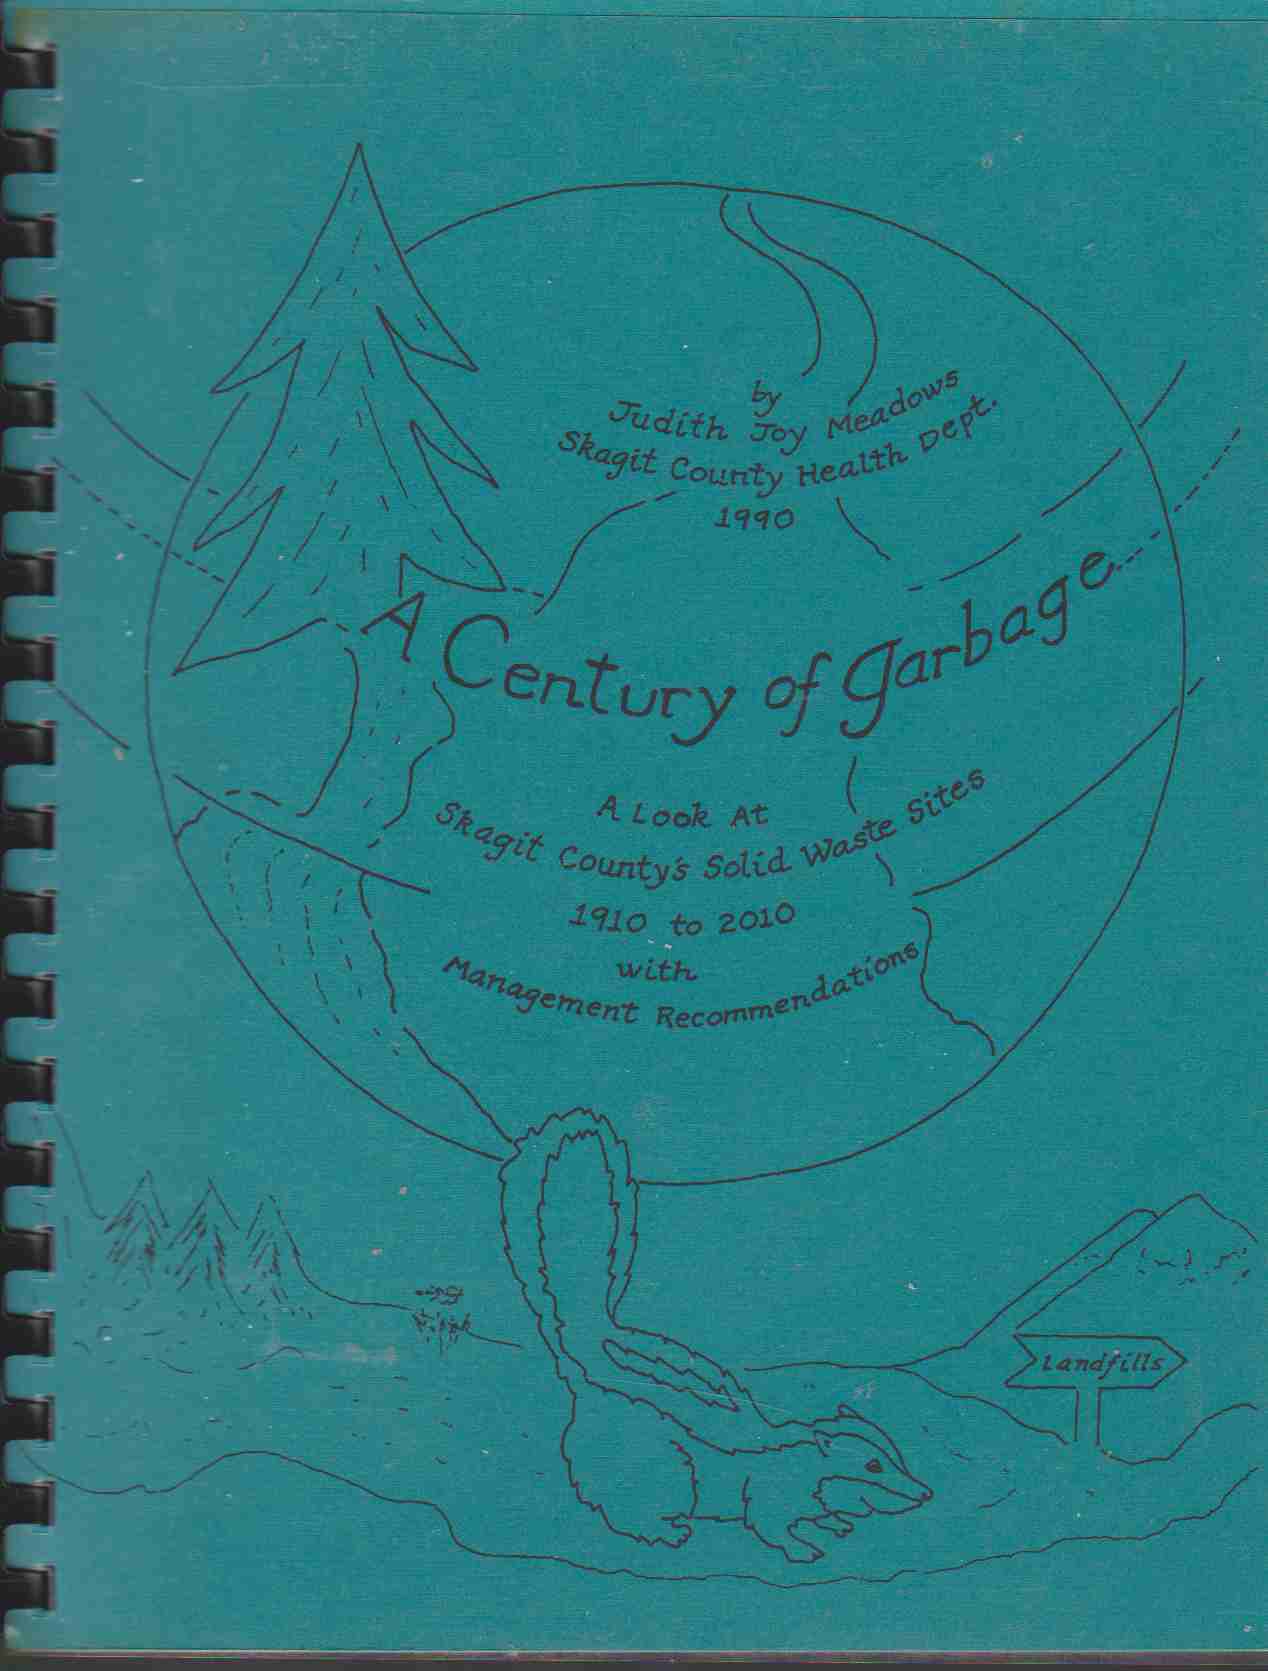 Image for A CENTURY OF GARBAGE The Evolution of Skagit County's Solid Waste Disposal Sites 1910-2010 with Management Recommendations